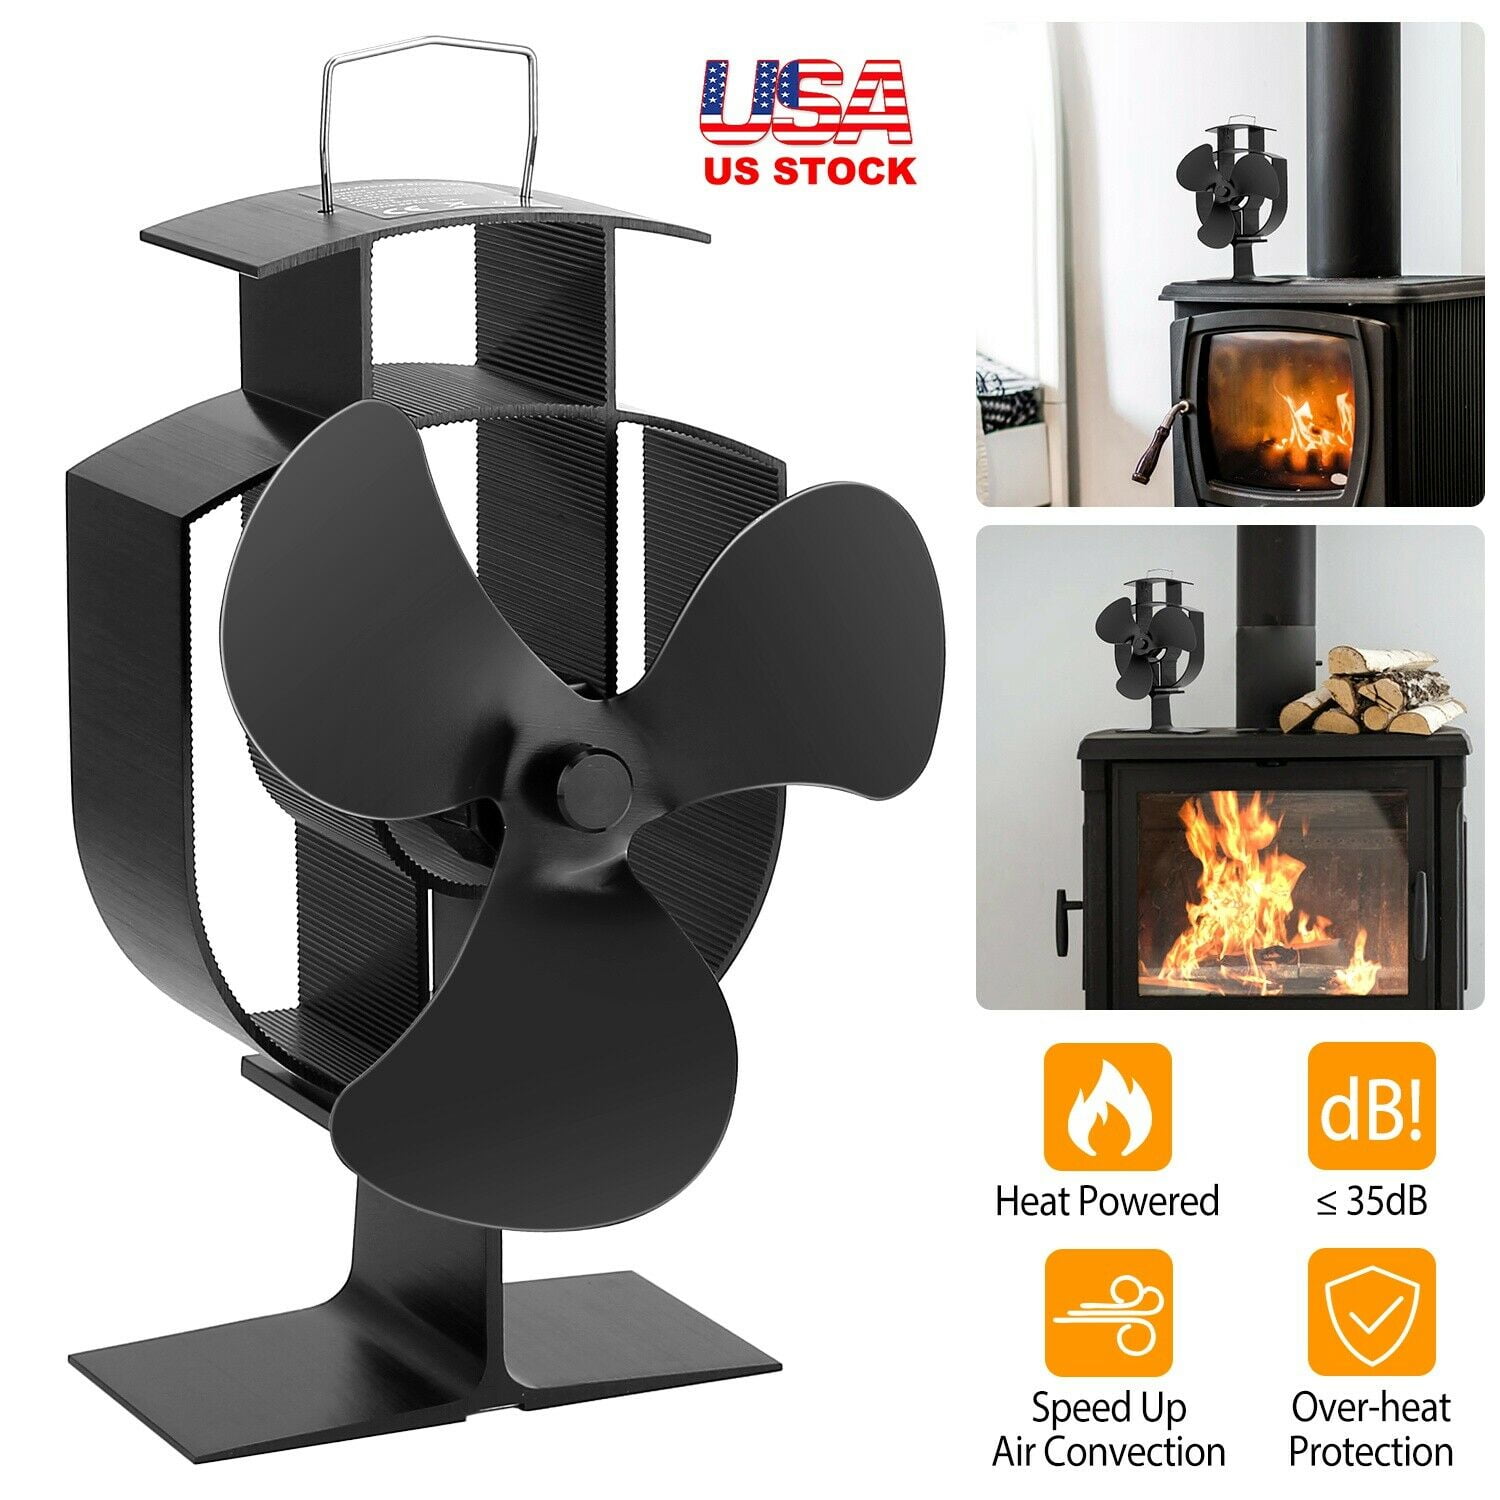 Heat Powered STOVE FAN 3 Blade Aluminum Thermoelectric Wood Log Burner Fireplace 